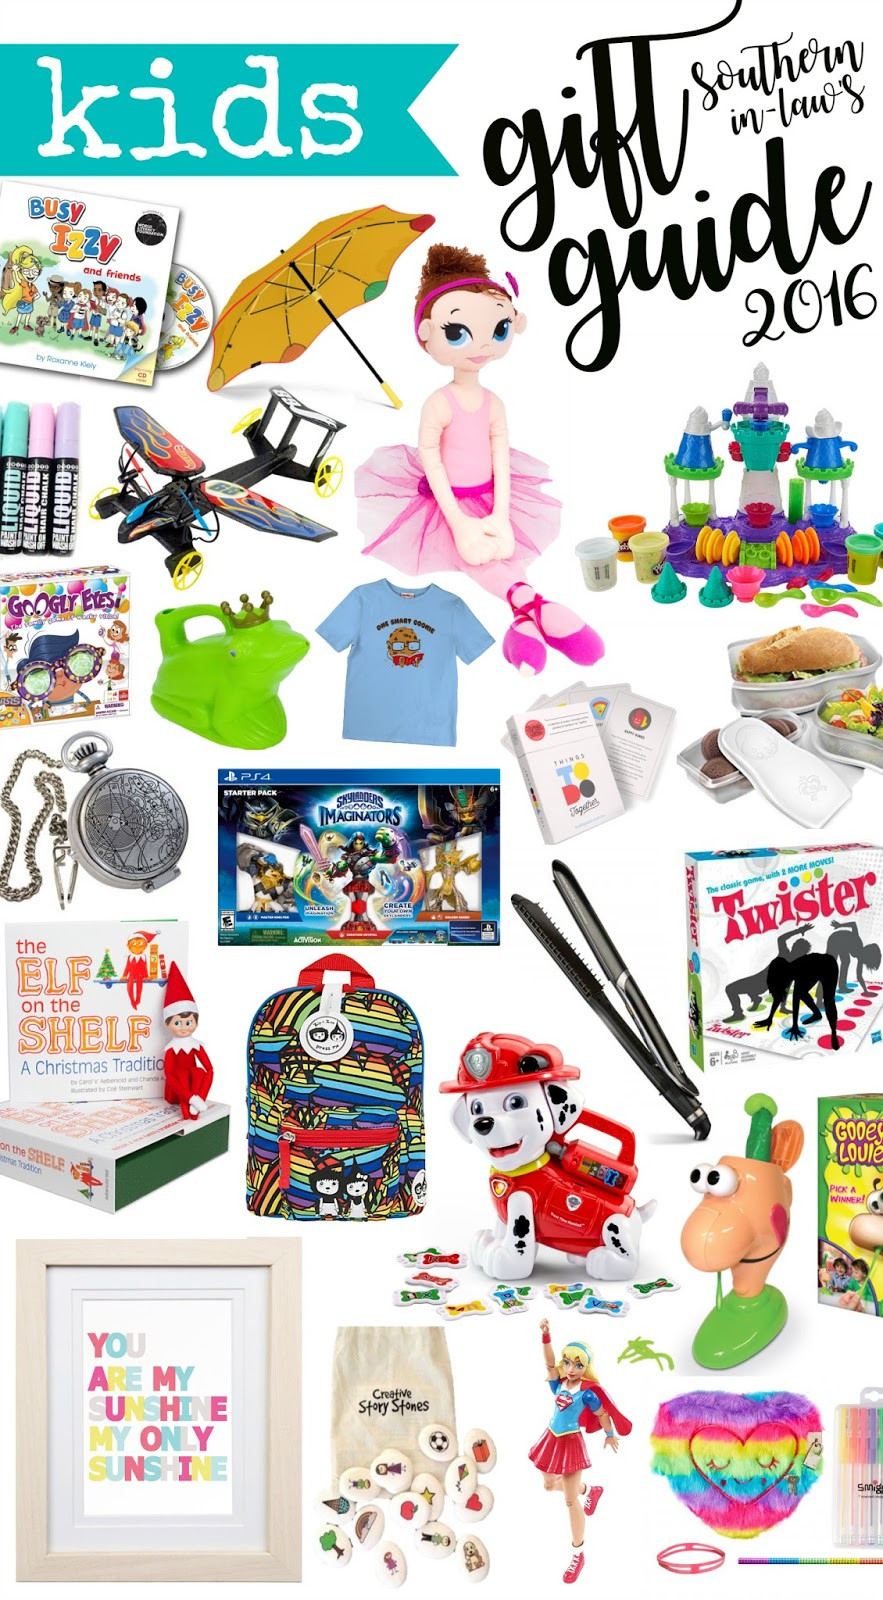 Best Holiday Gifts For Kids
 Southern In Law 2016 Kids Christmas Gift Guide